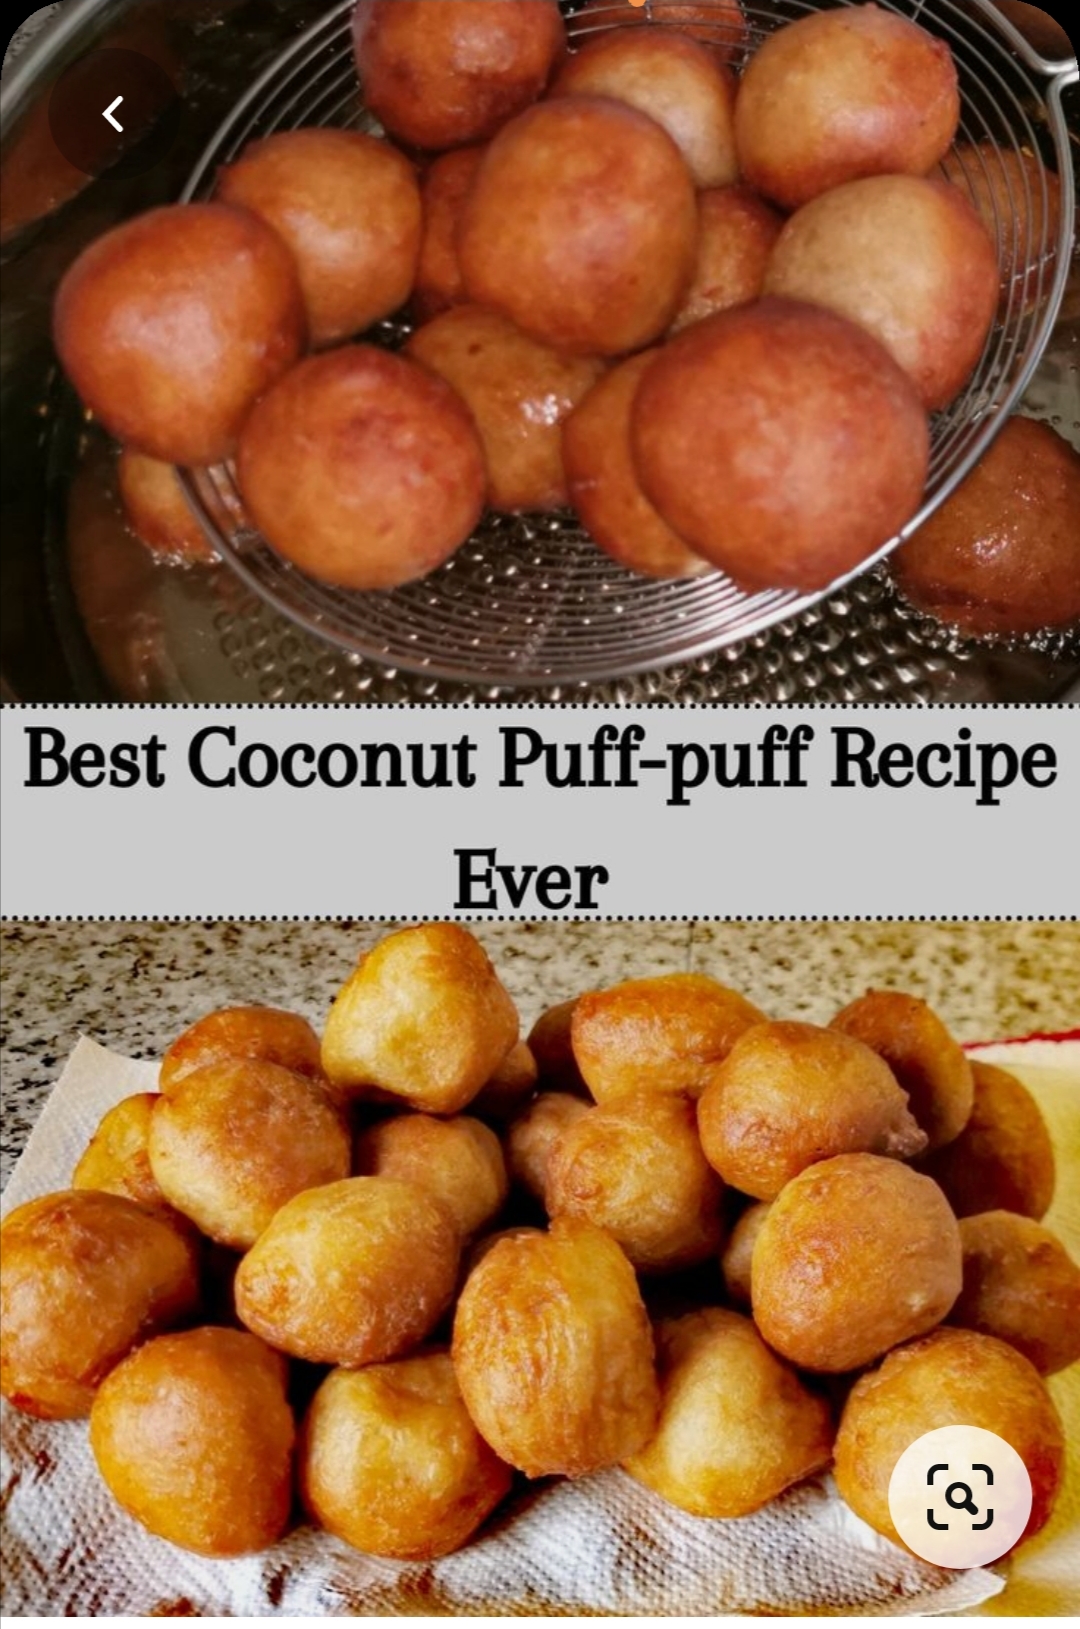 How To Make Coconut Puff Puff The Best Recipe Tinuolasblog